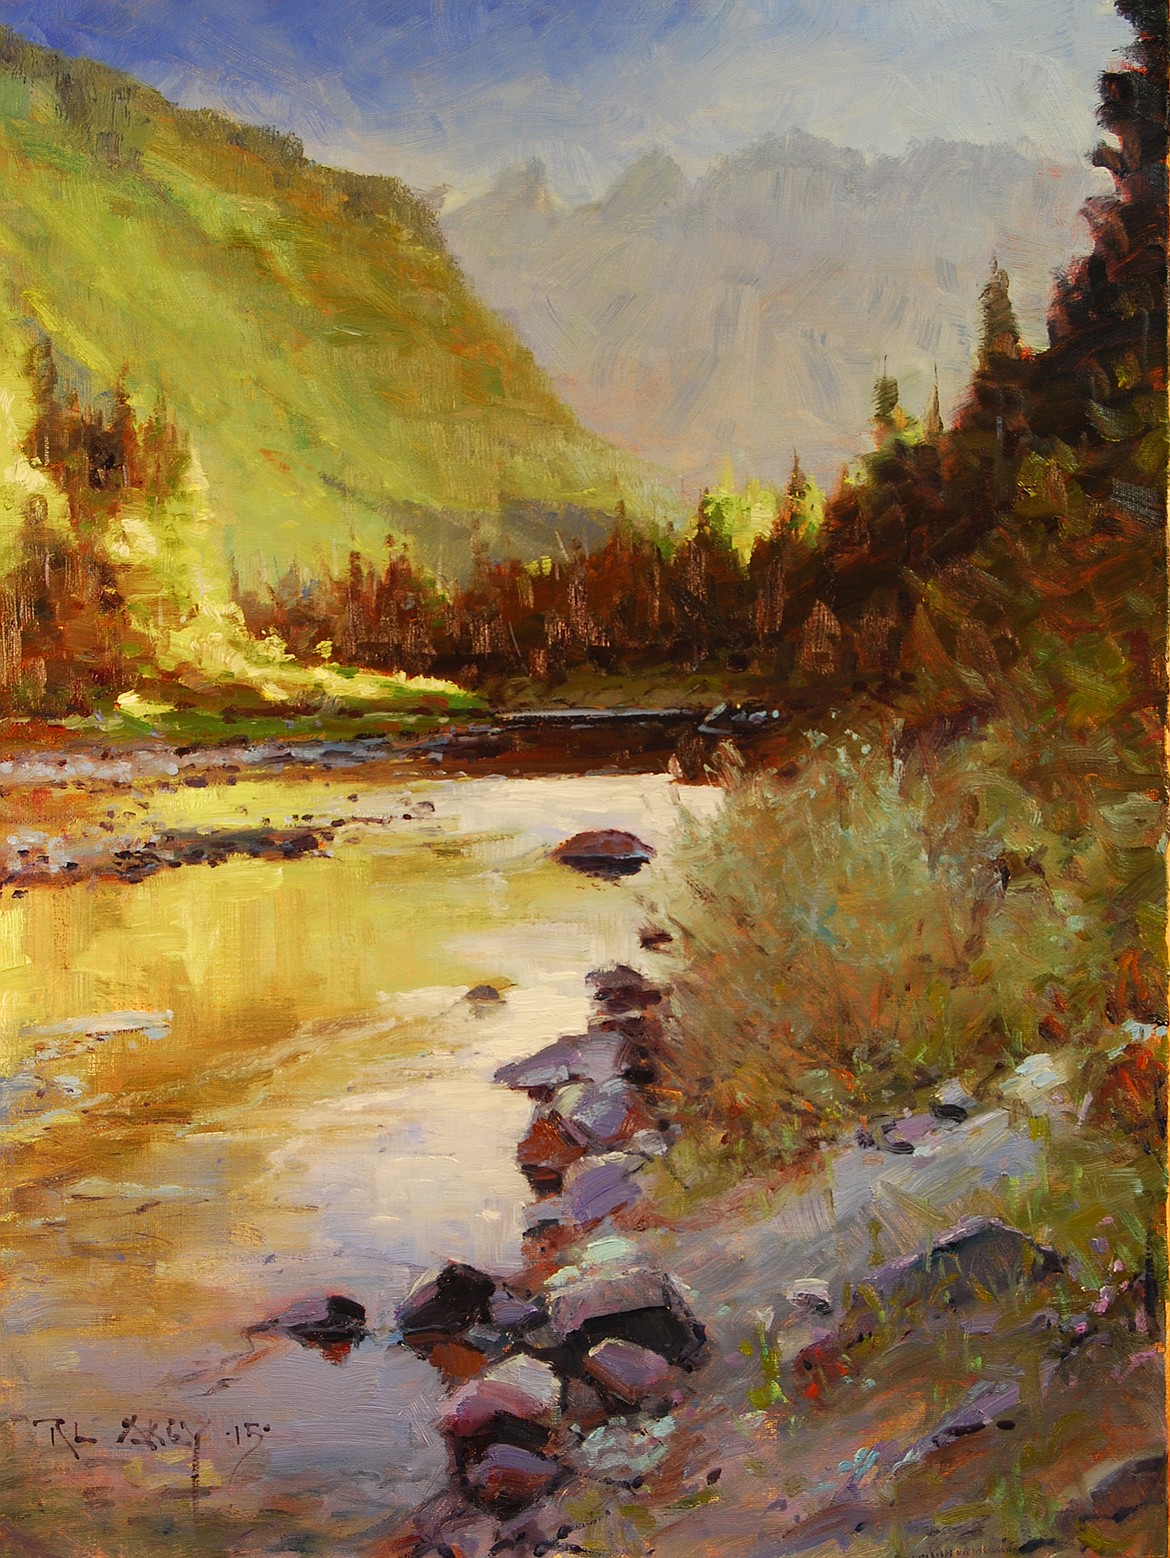 Rob Akey’s "Morning on McDonald Creek” oil on canvas is part of a private collection. (Photo courtesy Rob Akey)